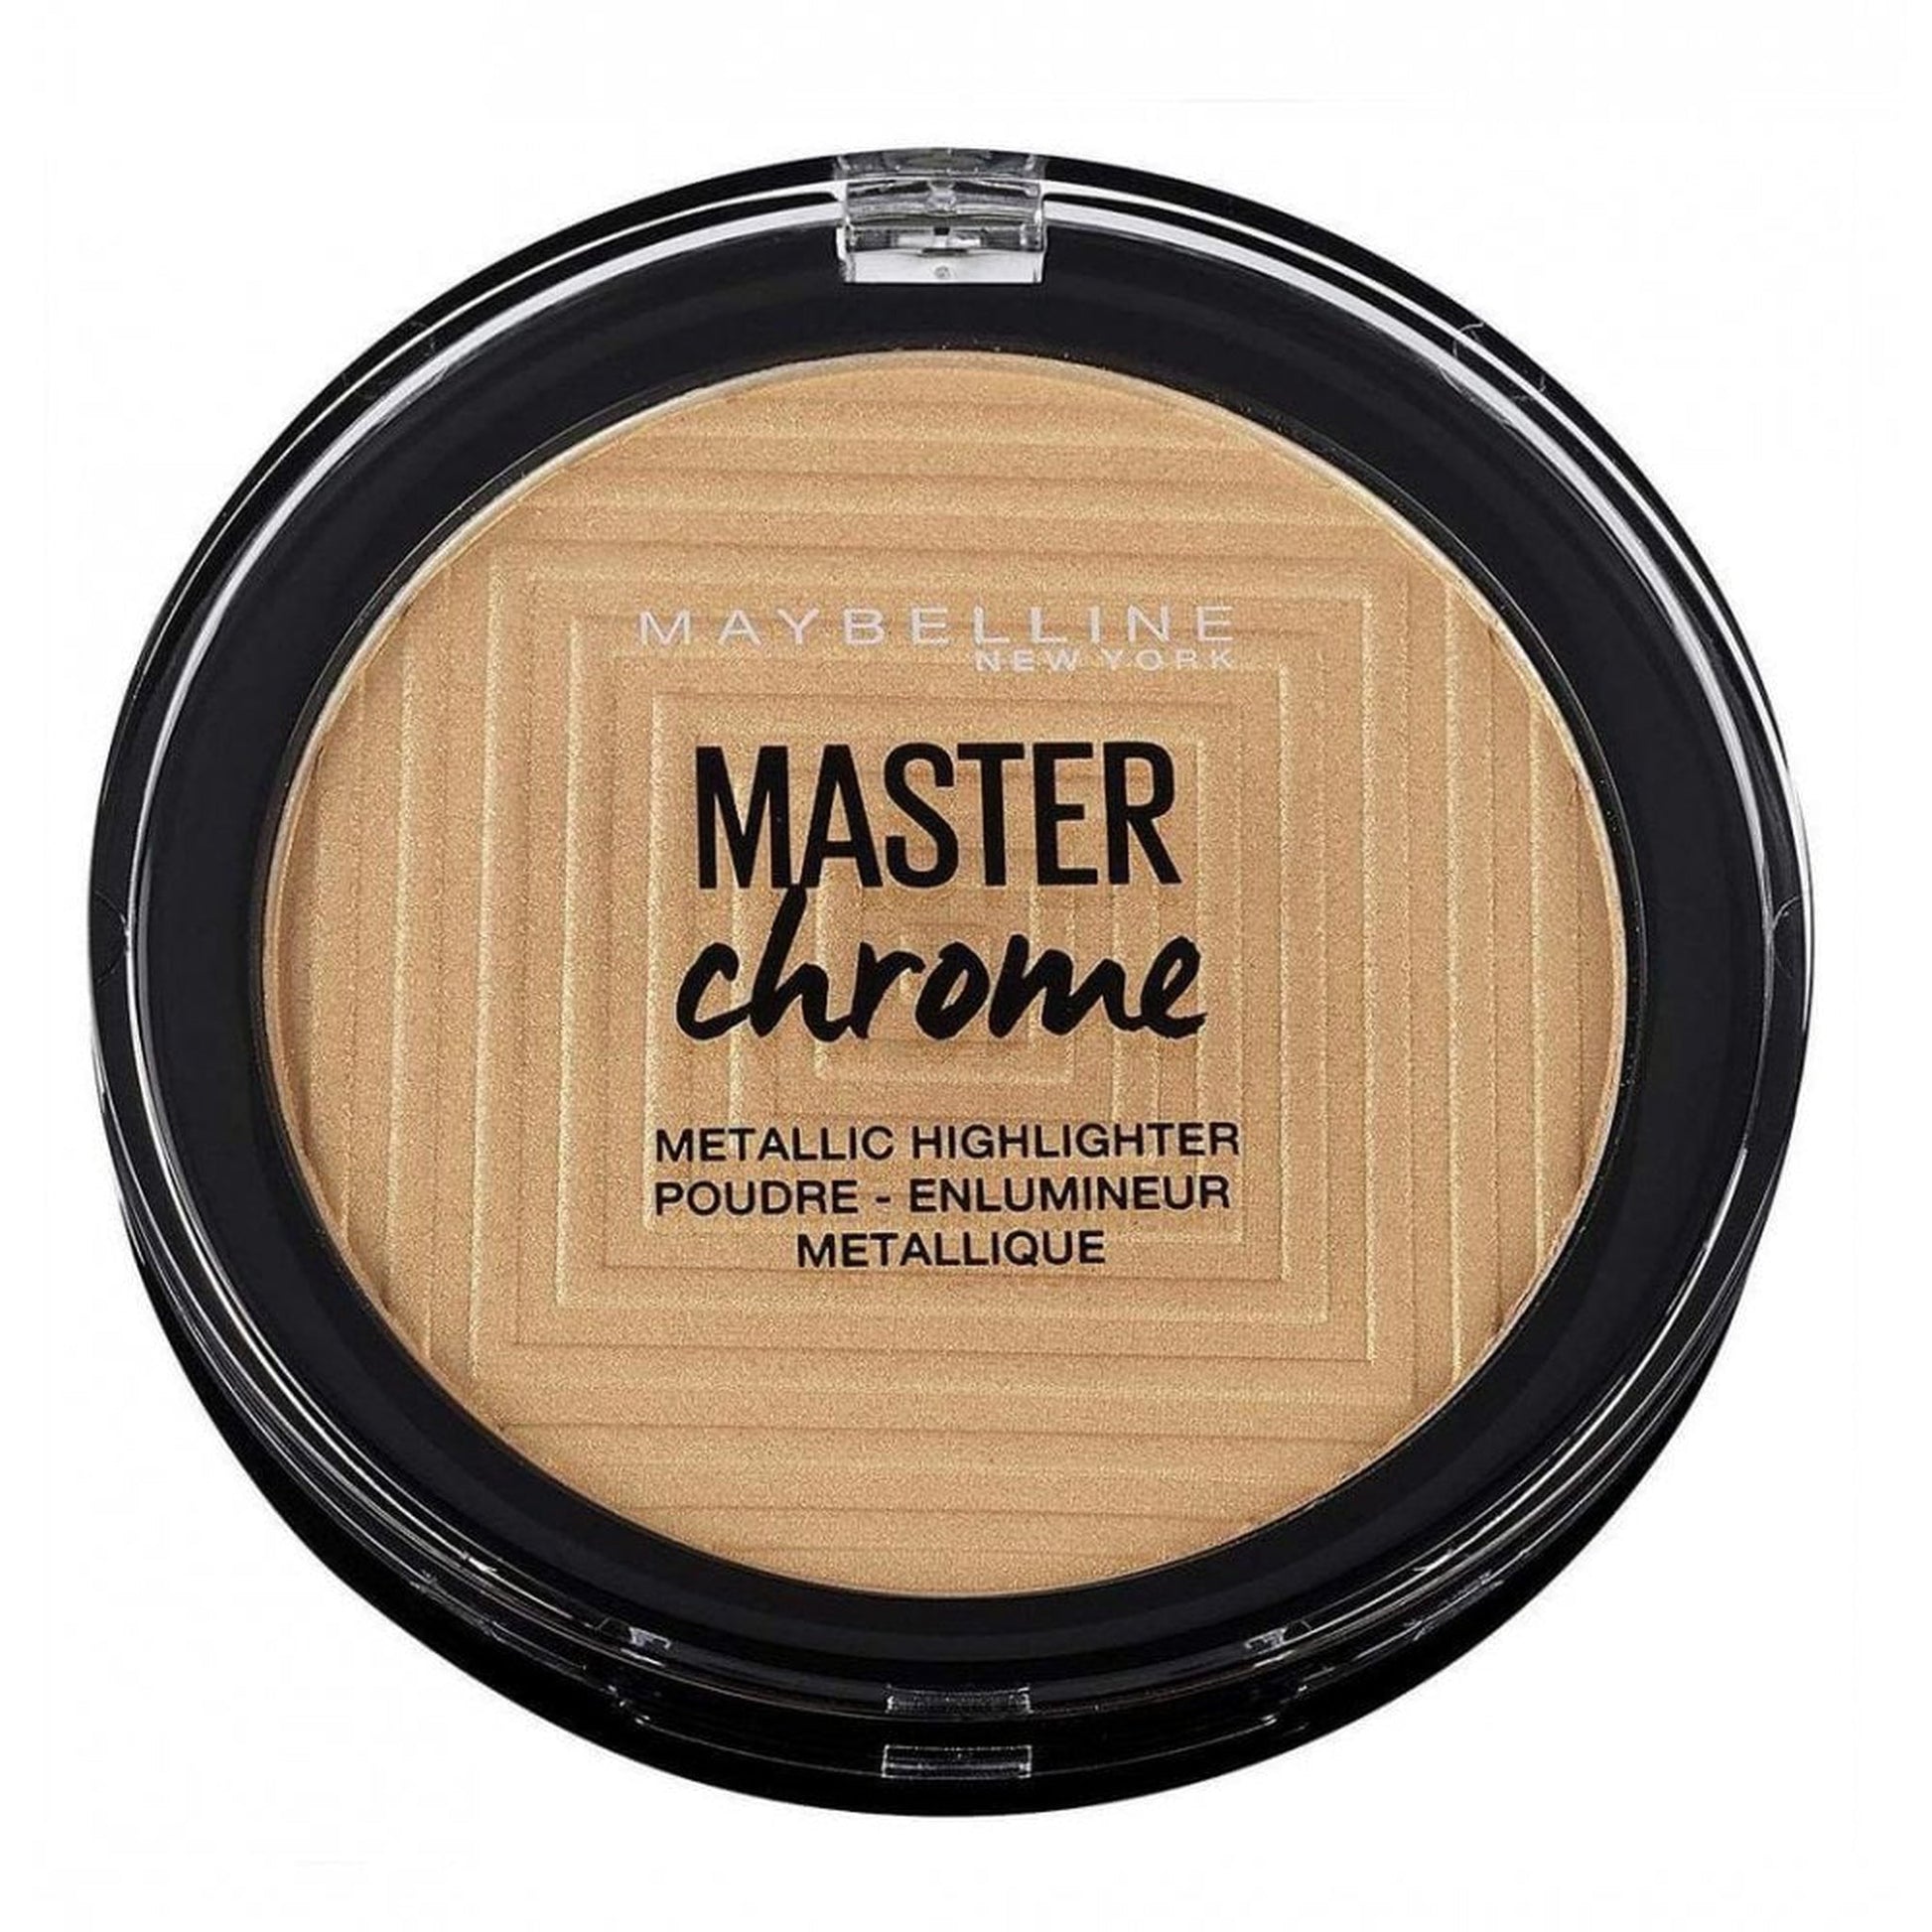 Maybelline Master Chrome Metallic Highlighter - 100 Molten Gold-Maybelline-BeautyNmakeup.co.uk